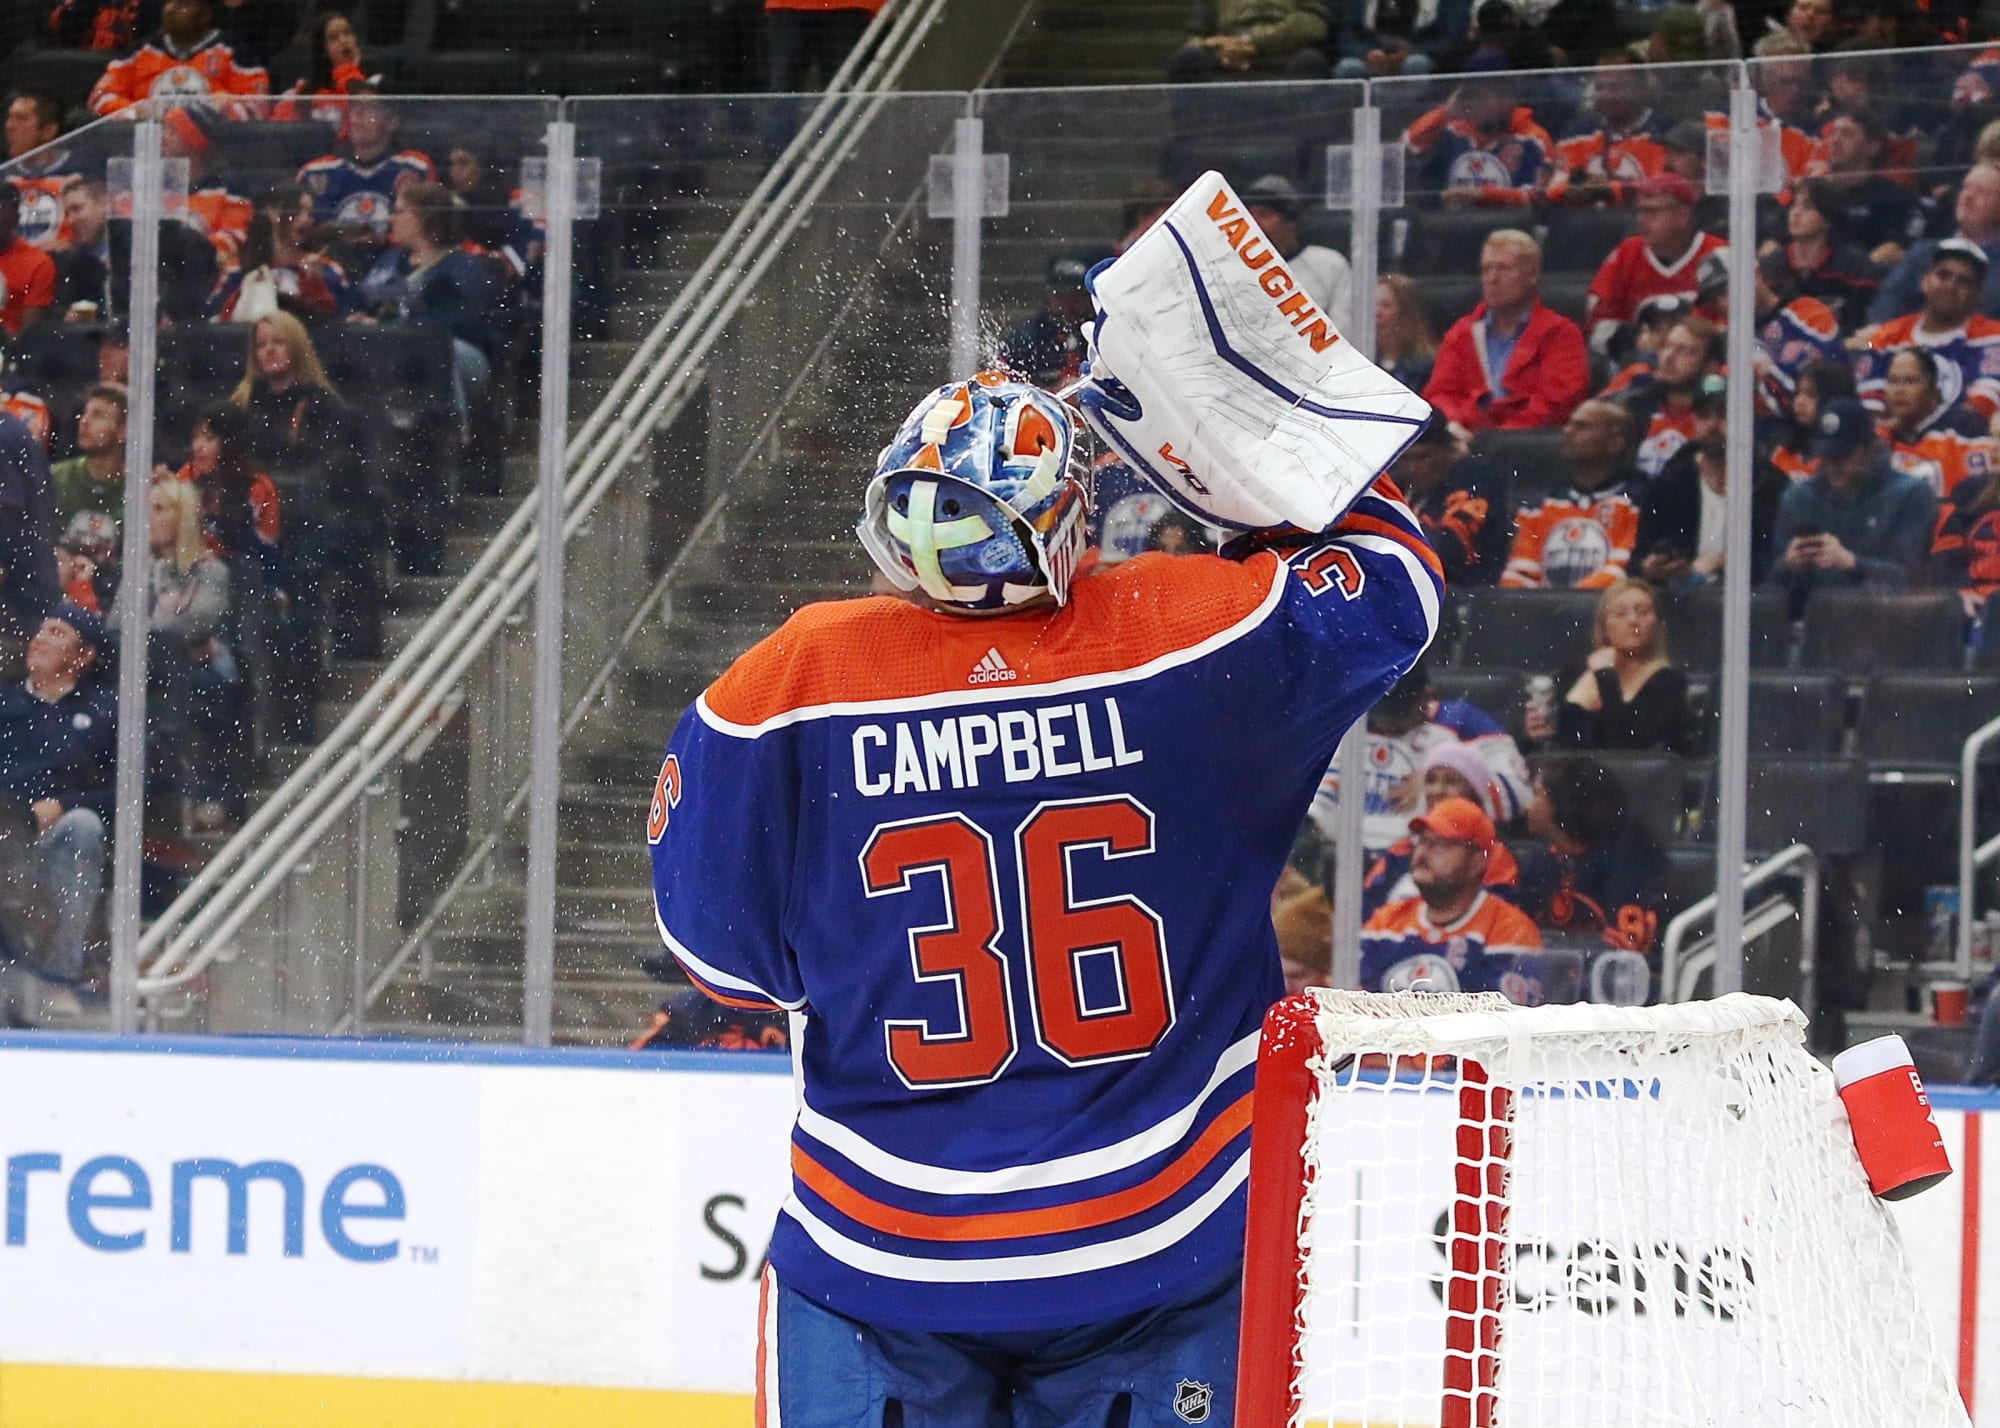 From Soup to slump, Oilers' Jack Campbell returns to Scotiabank Arena